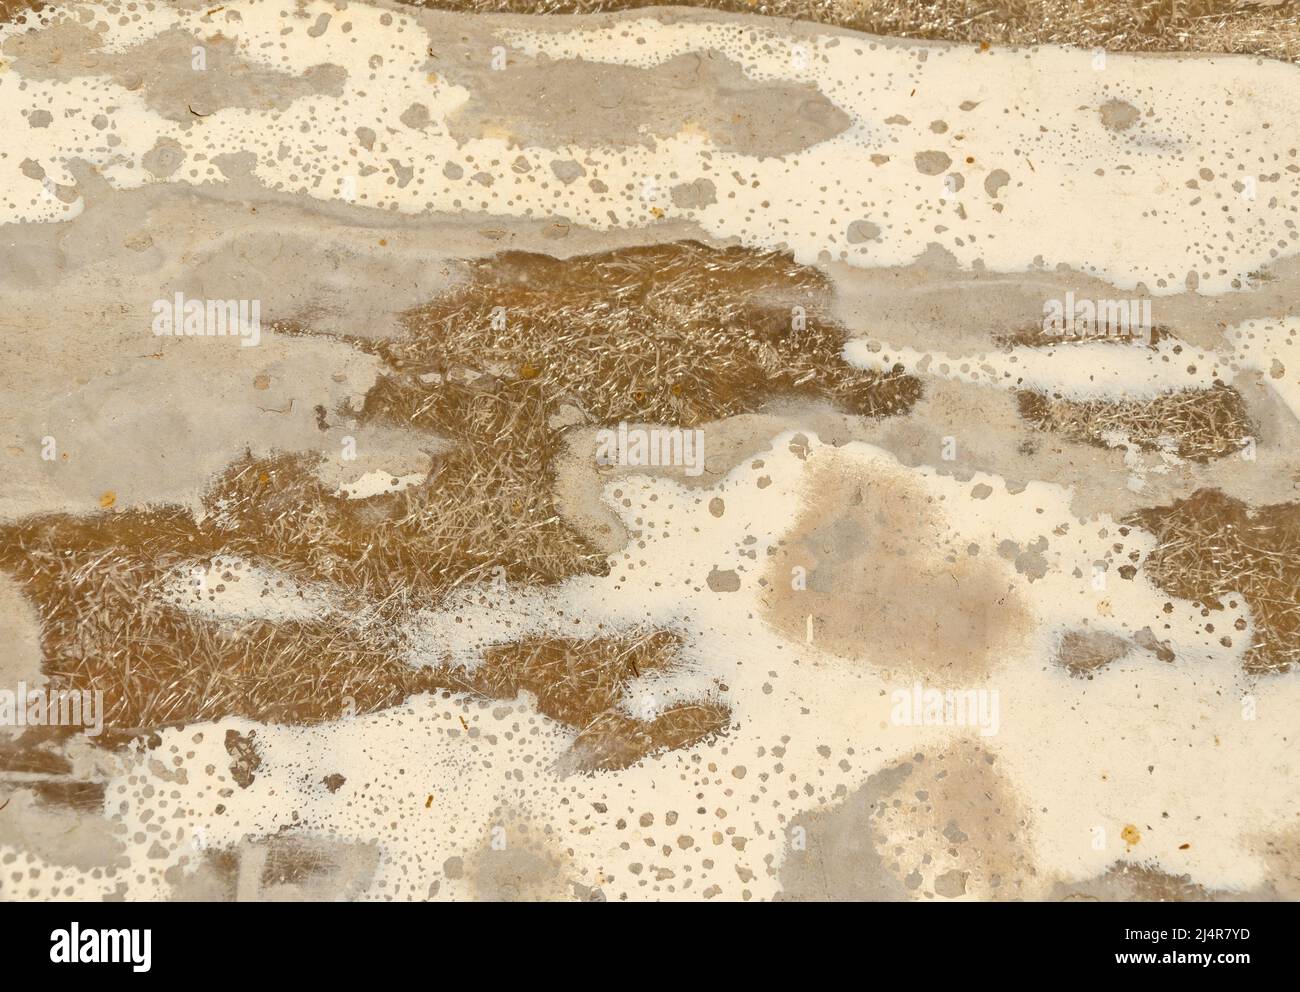 Background with grey, white, and brown flat surfaces - close-up Stock Photo